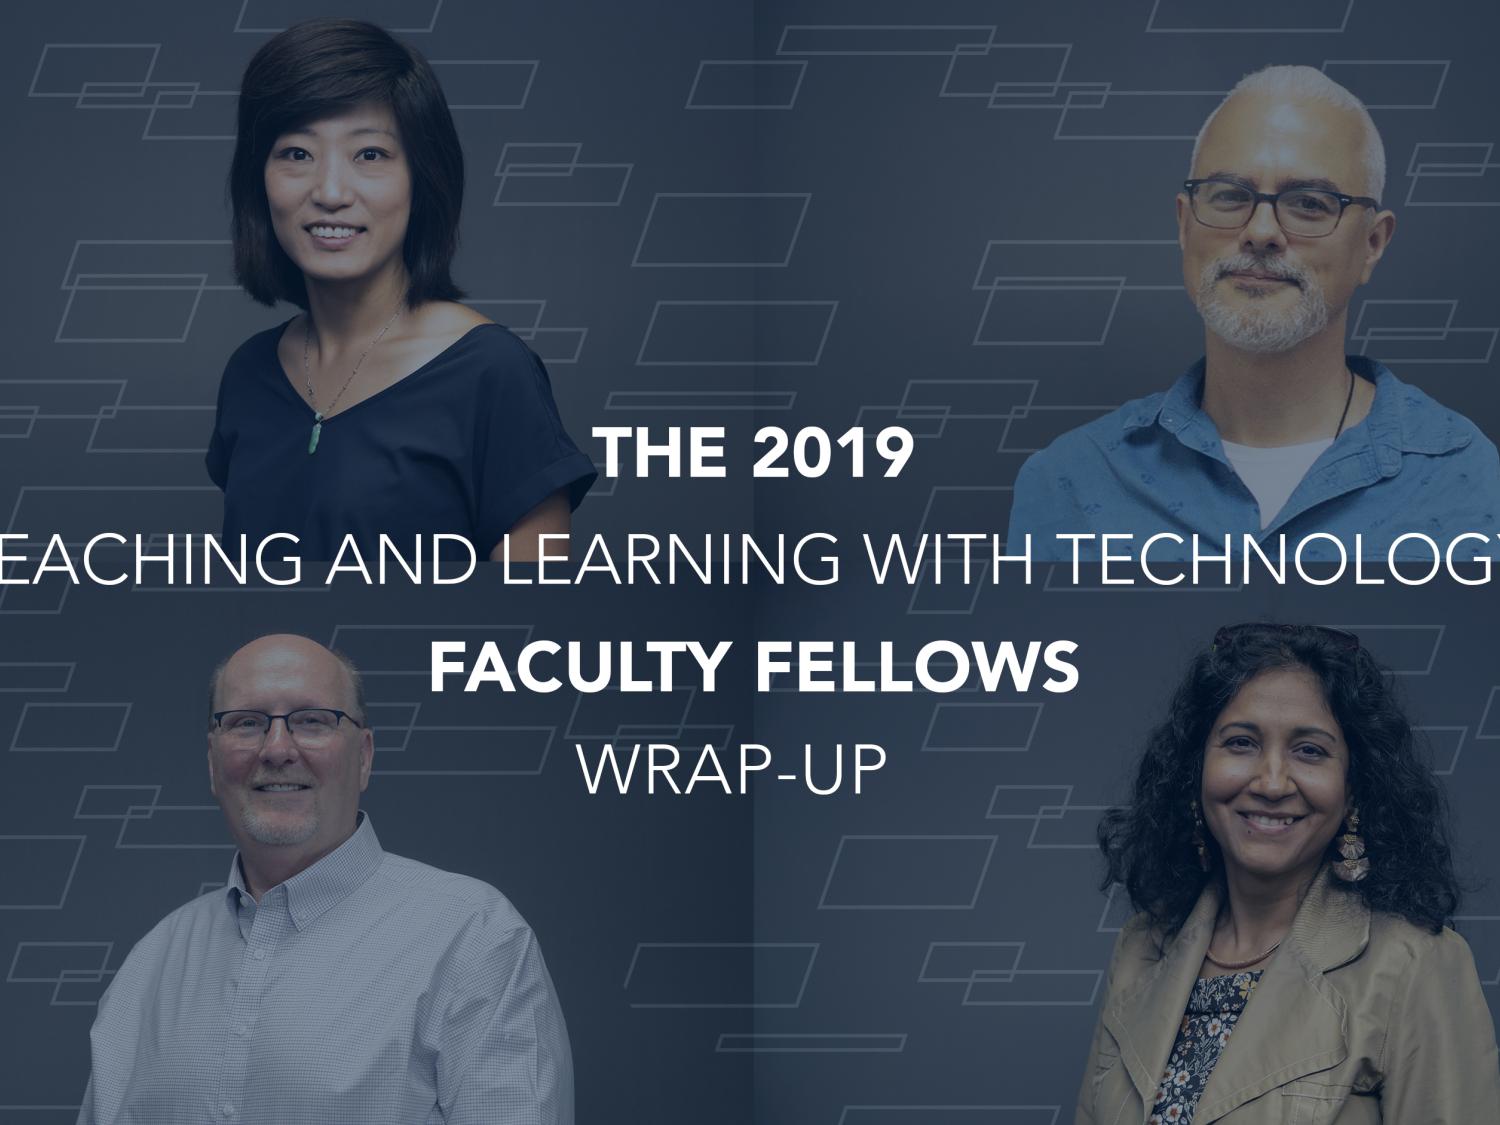 2019-20 Teaching and Learning with Technology Faculty Fellows project wrap-up